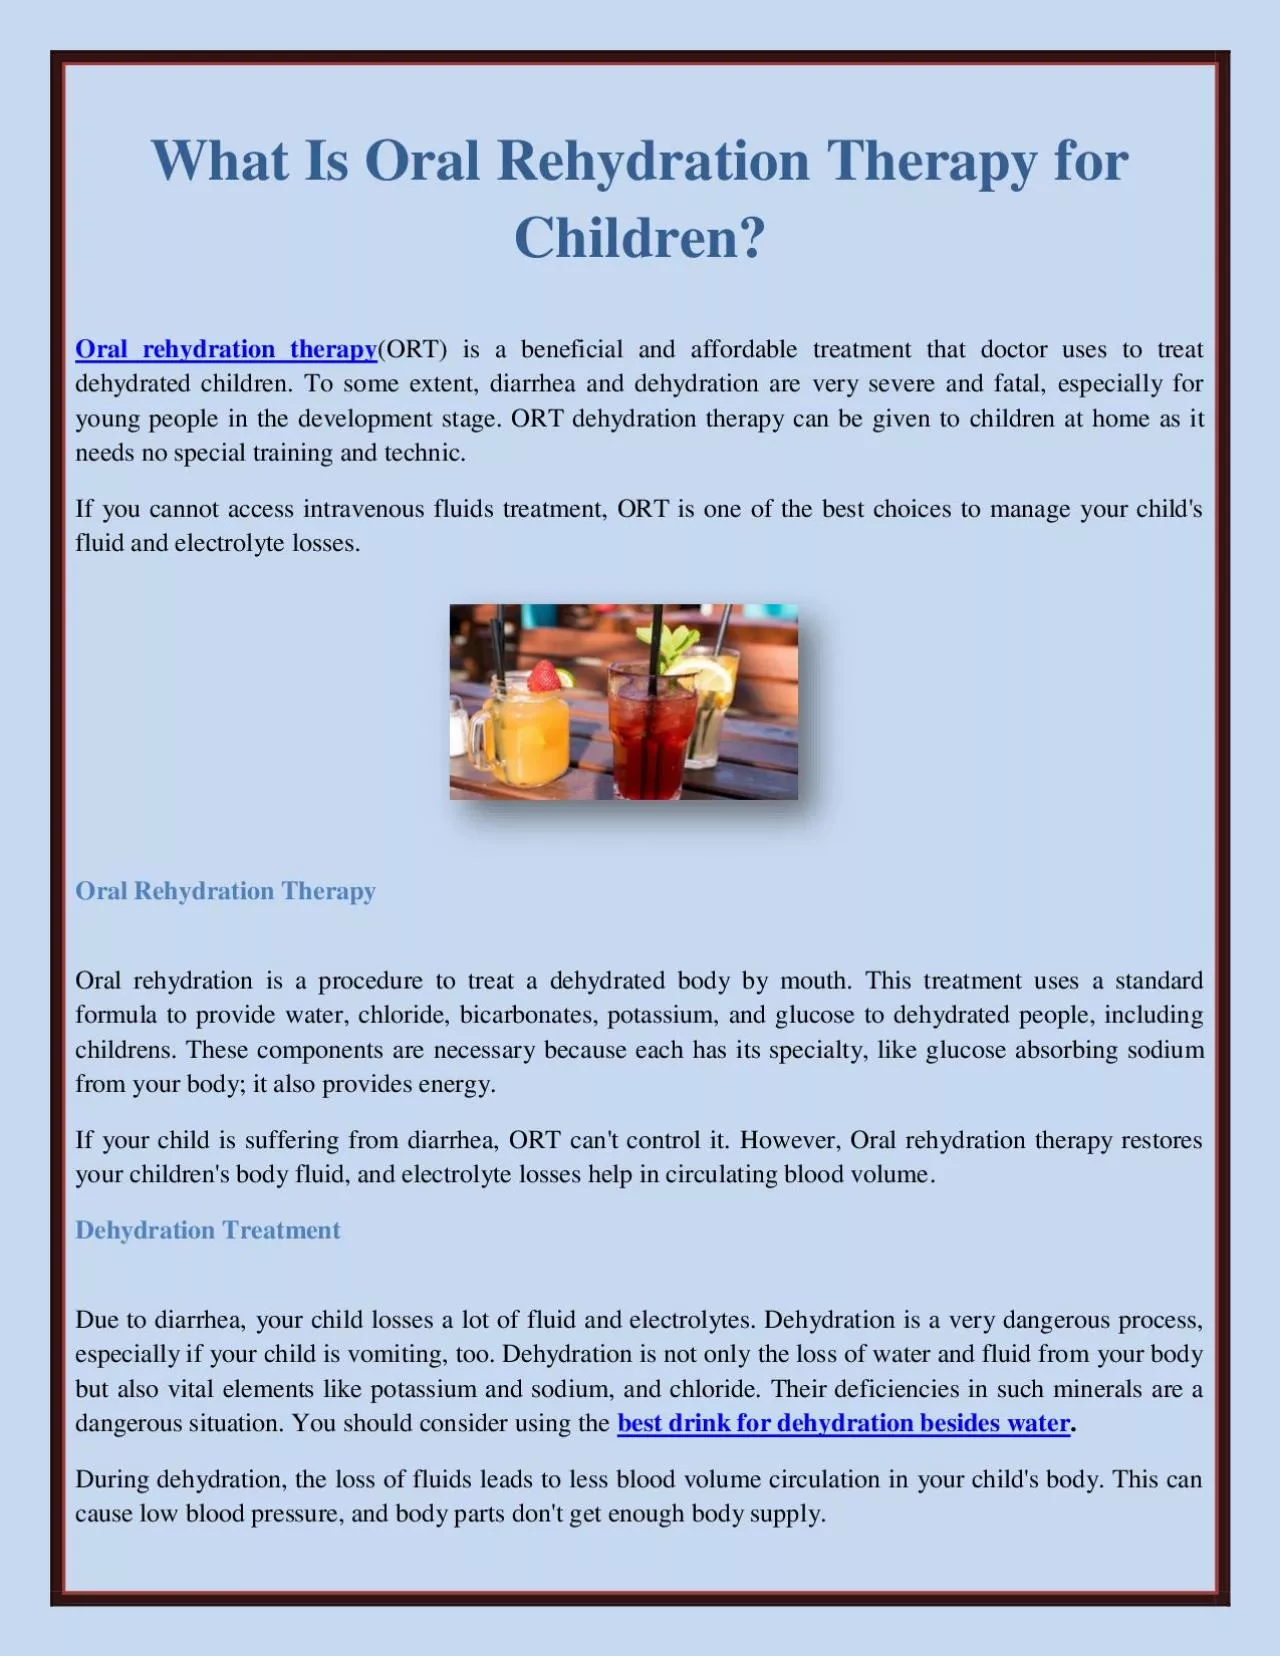 What Is Oral Rehydration Therapy for Children?